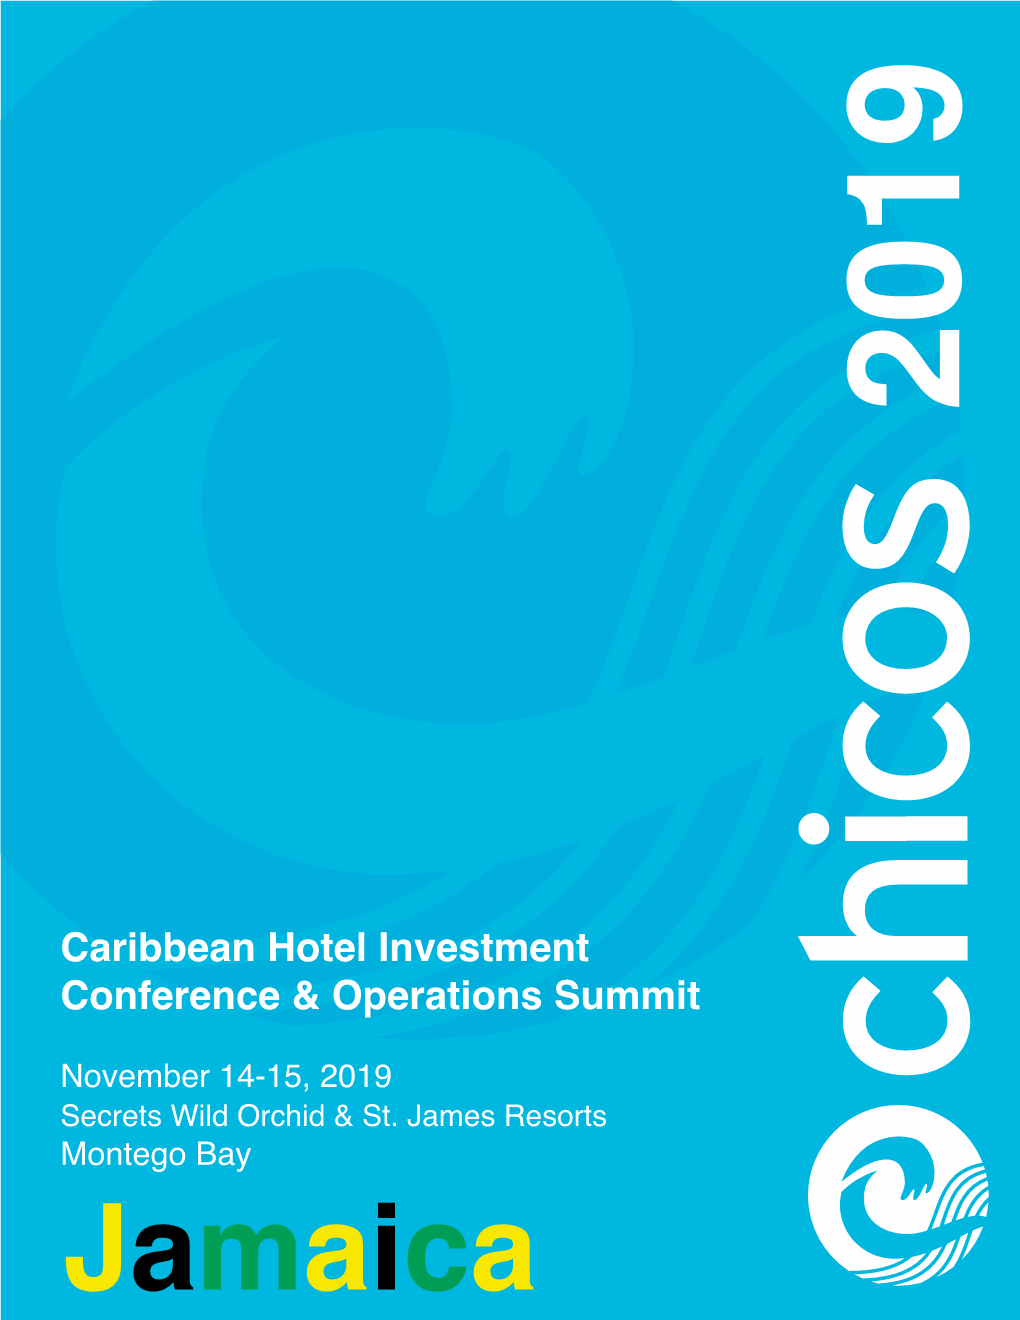 Caribbean Hotel Investment Conference & Operations Summit